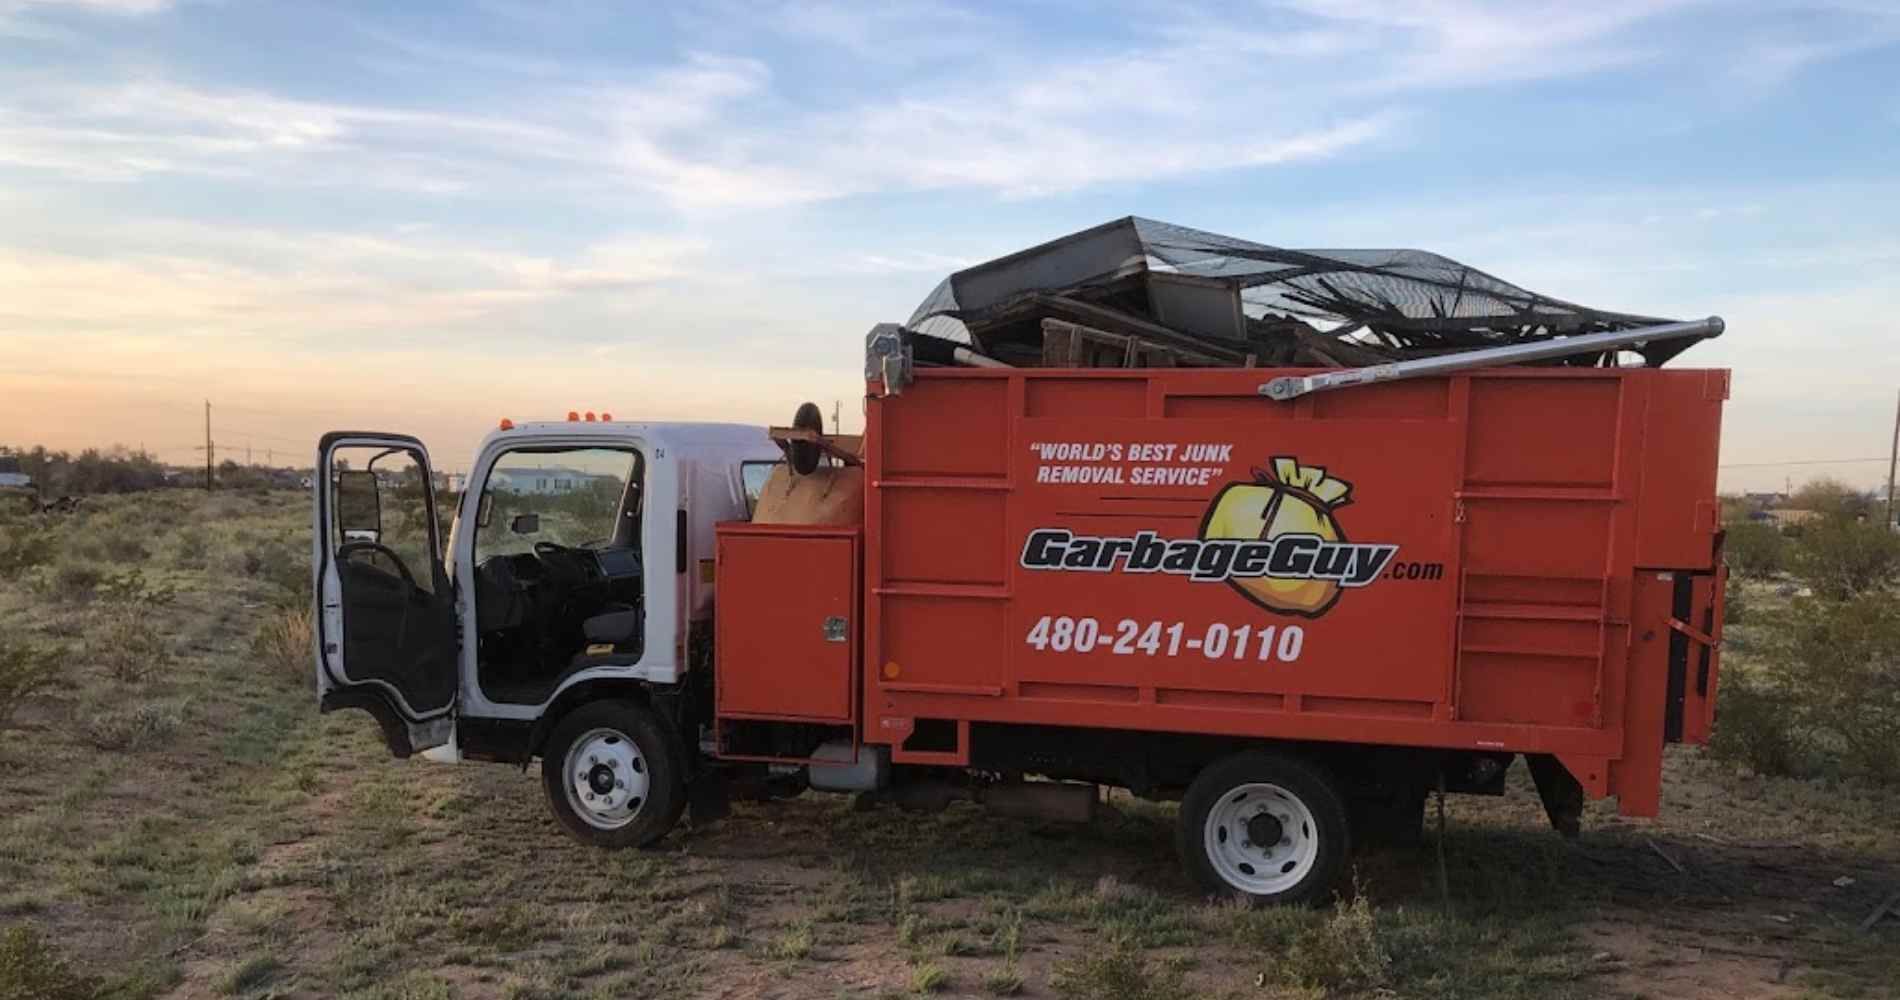 #1 for Junk Removal in Mesa, AZ with Over 1200 5-Star Reviews!